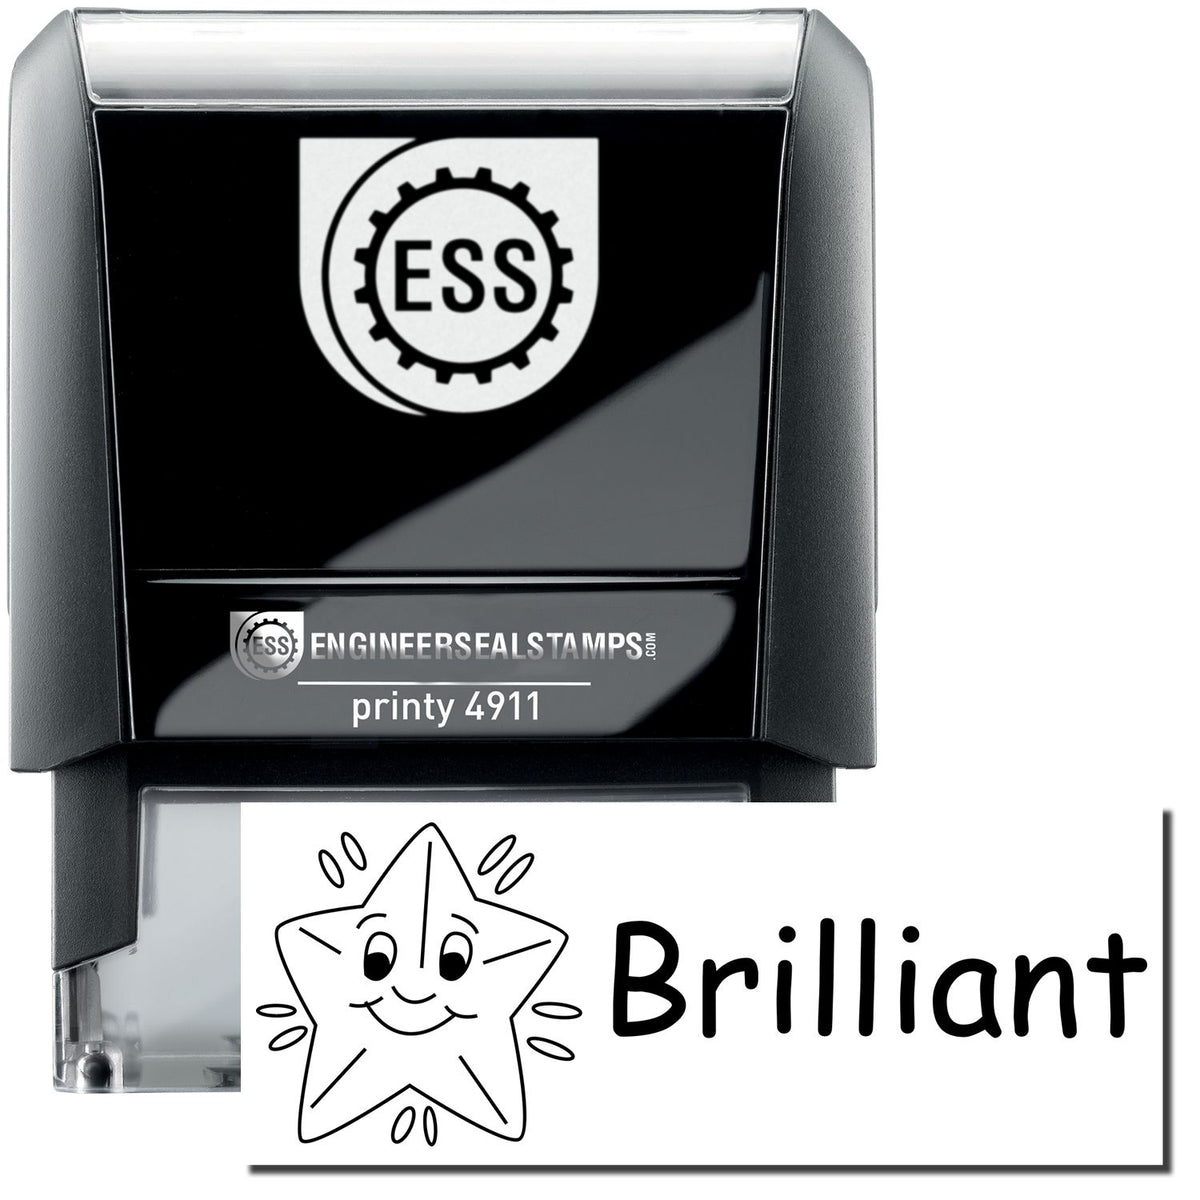 A self-inking stamp with a stamped image showing how the text &quot;Brilliant&quot; with a graphic of a shining star with a smile next to the text is displayed after stamping.